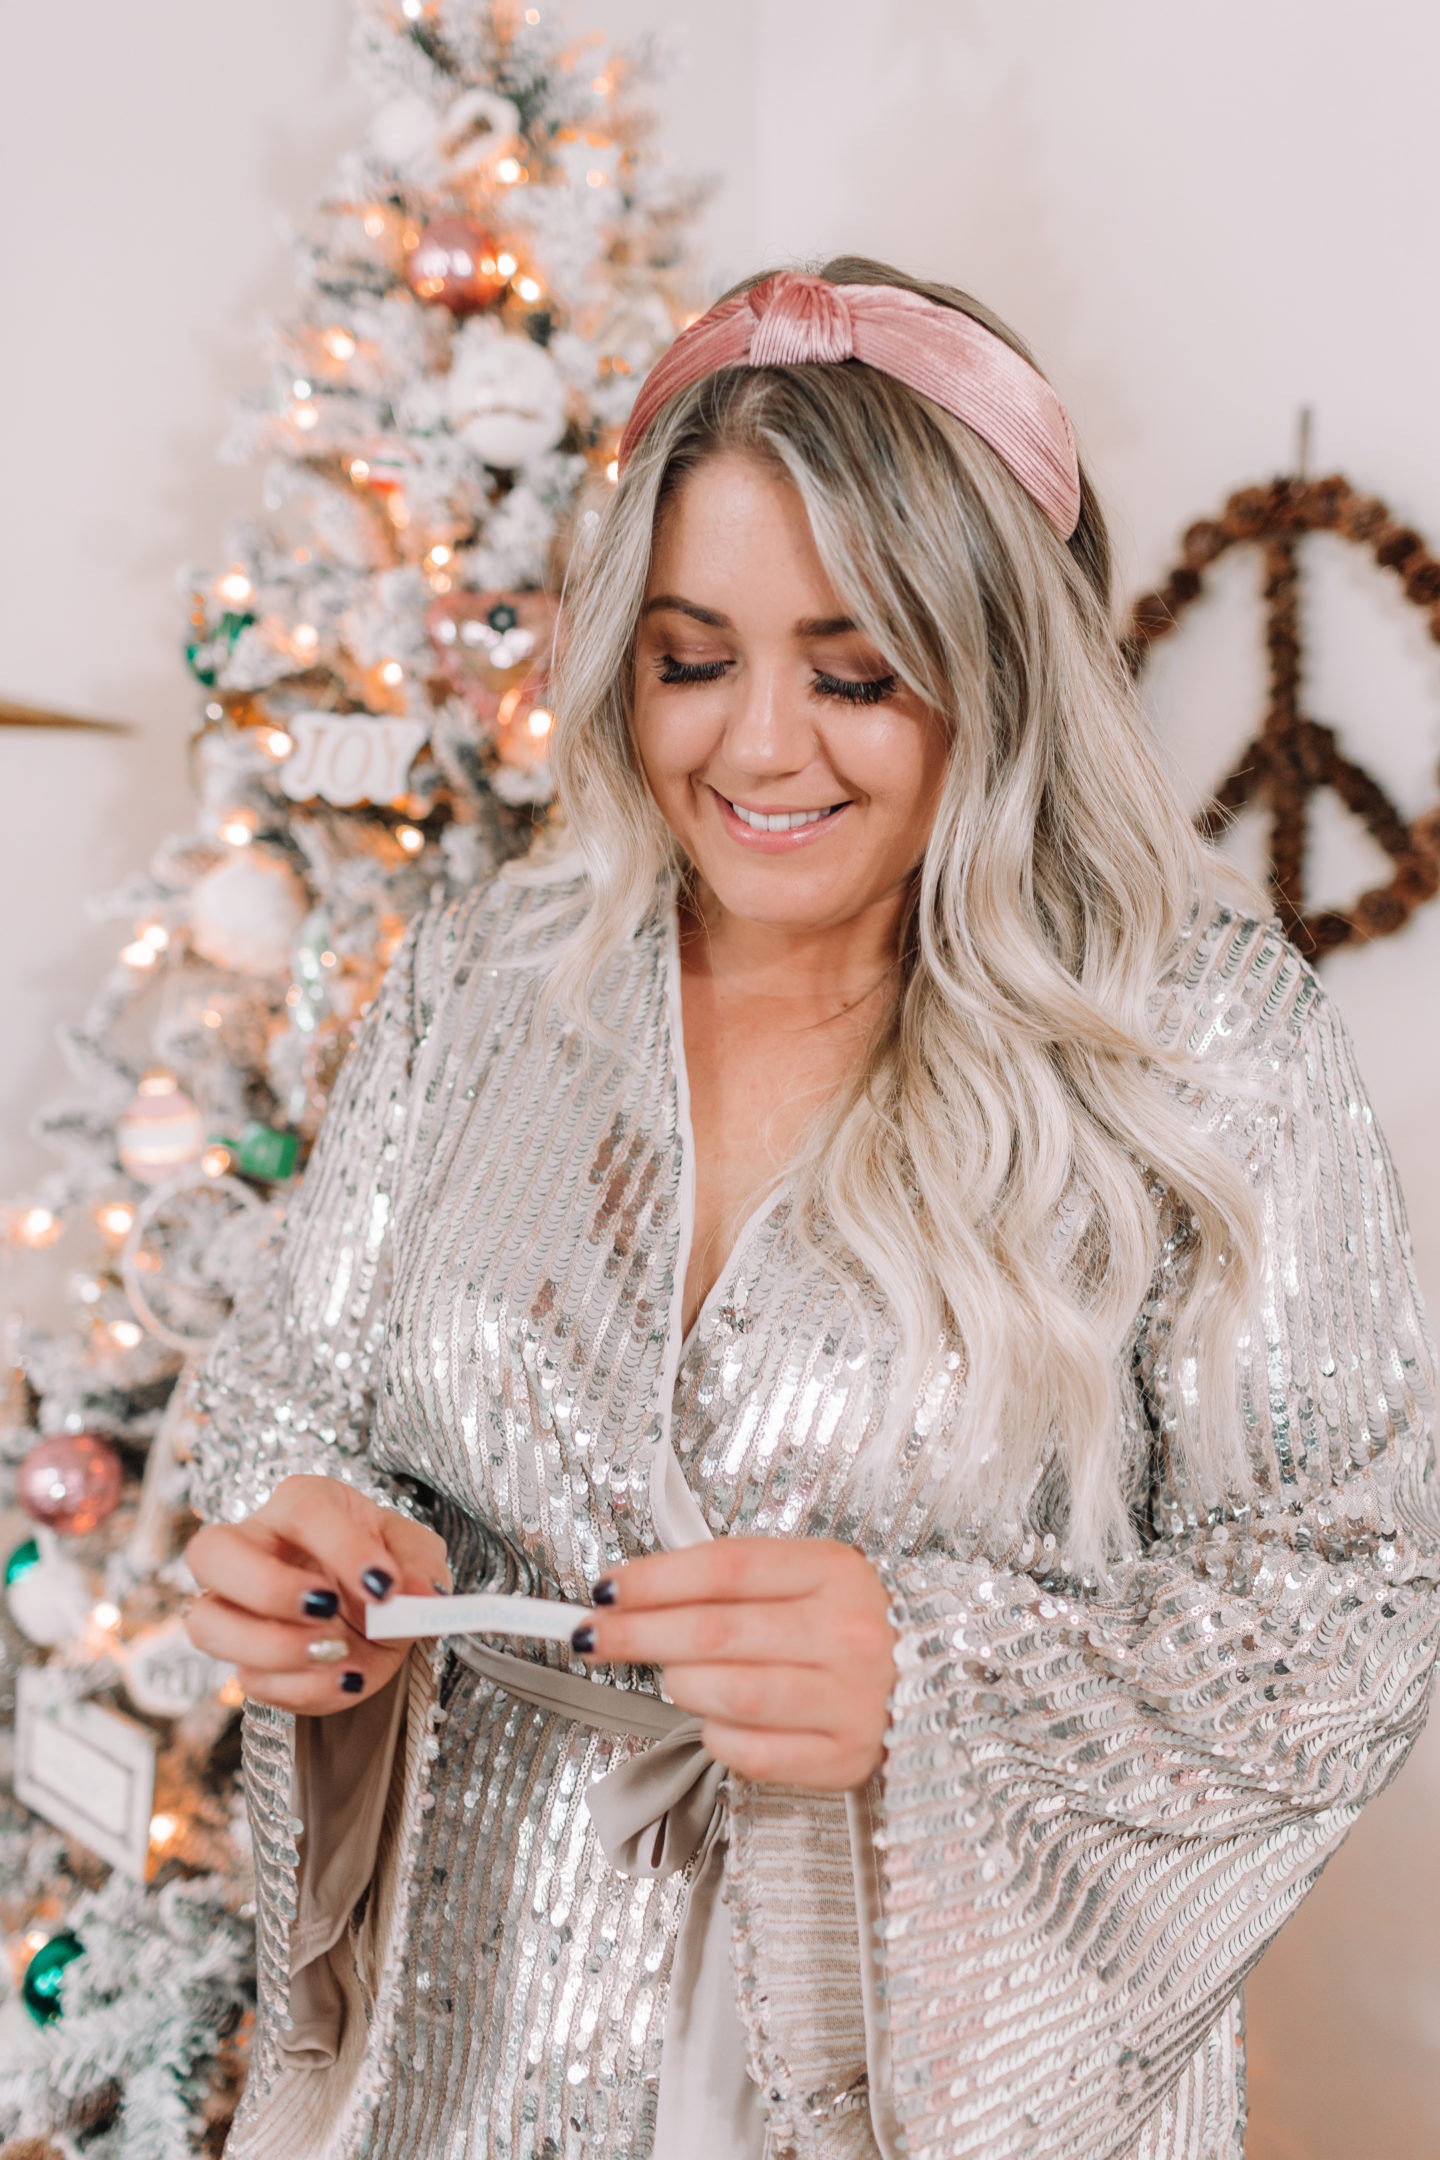 holiday sequin dress Dress // Confidently This Holiday Season with Fearless Tape // wanderabode.com